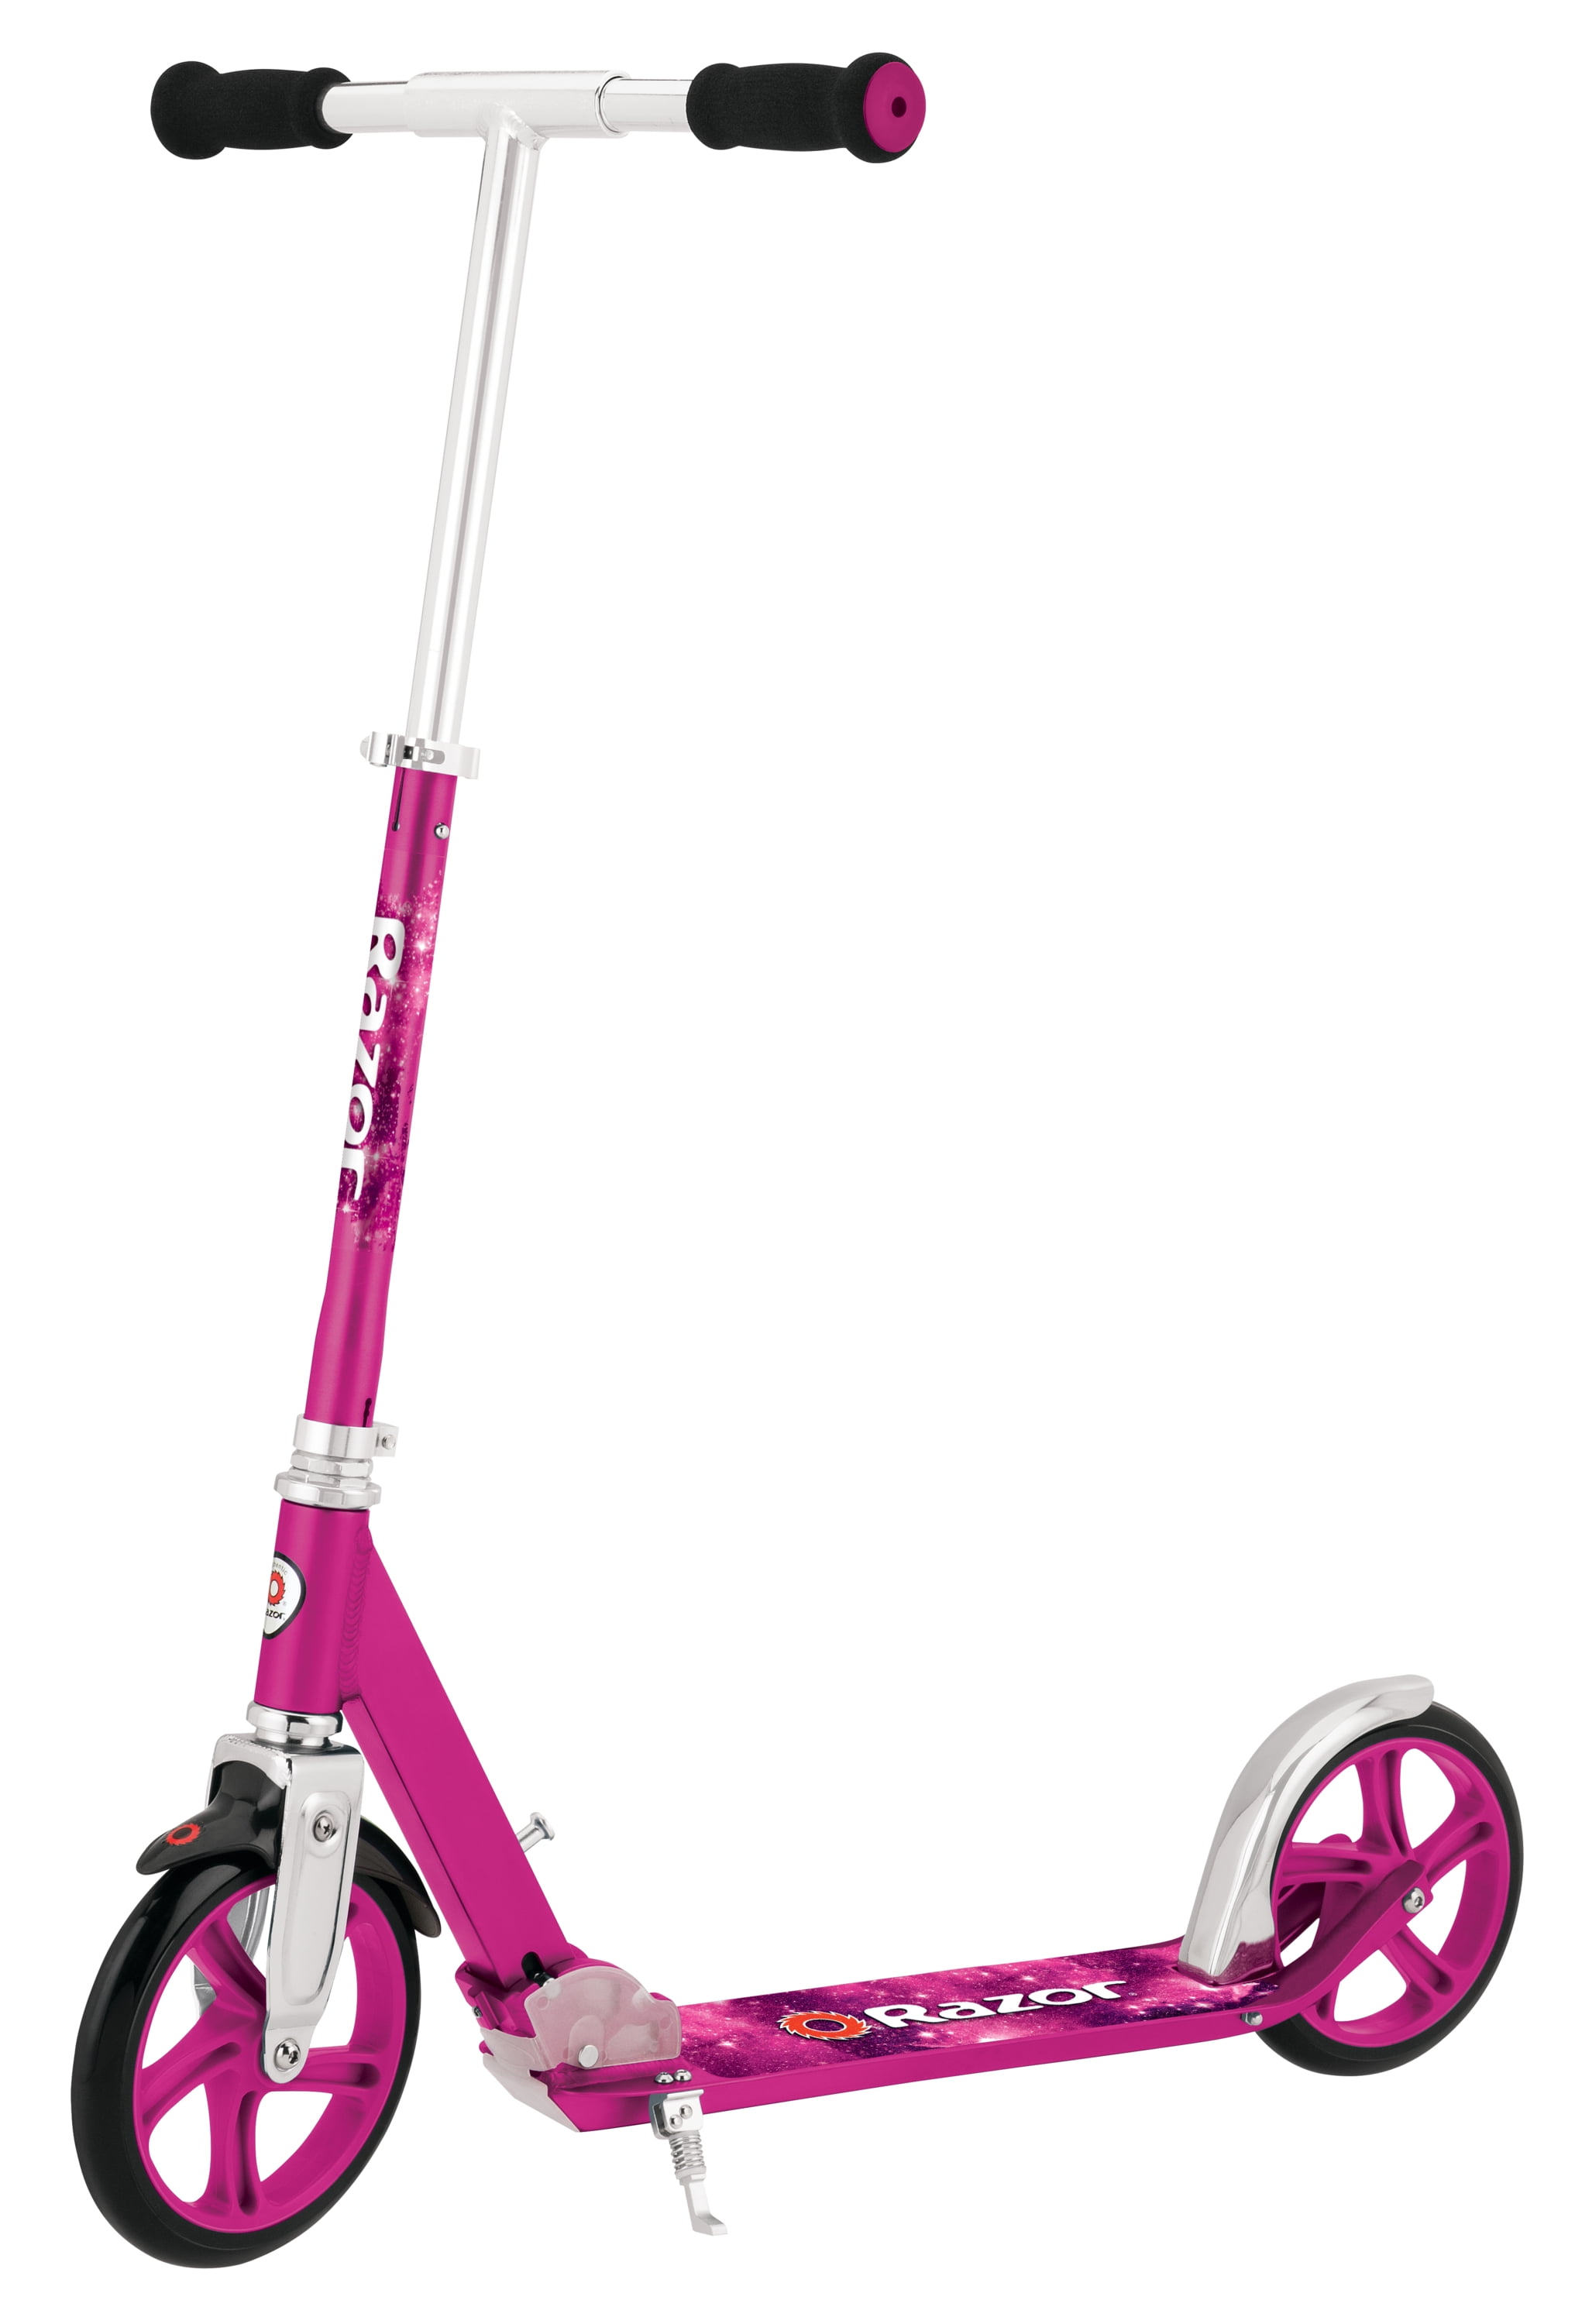 A5 Lux Kick Scooter - Large 8" Wheels, Adjustable Handlebars, Lightweight, for Riders up to 220 lbs - Walmart.com